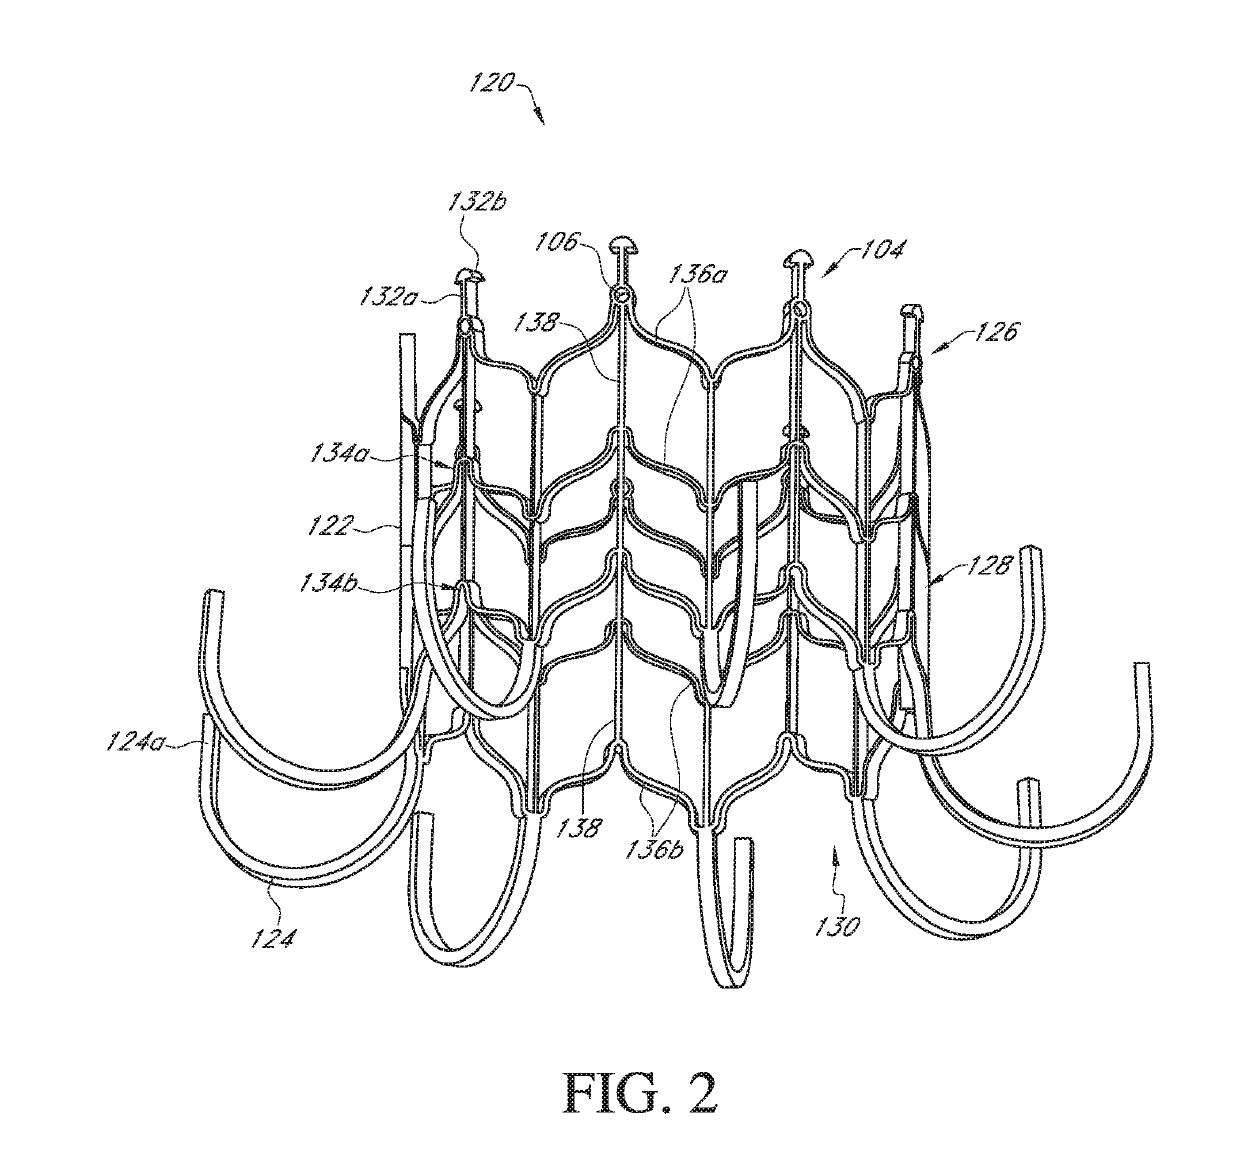 Prosthetic mitral valve with improved anchors and seal